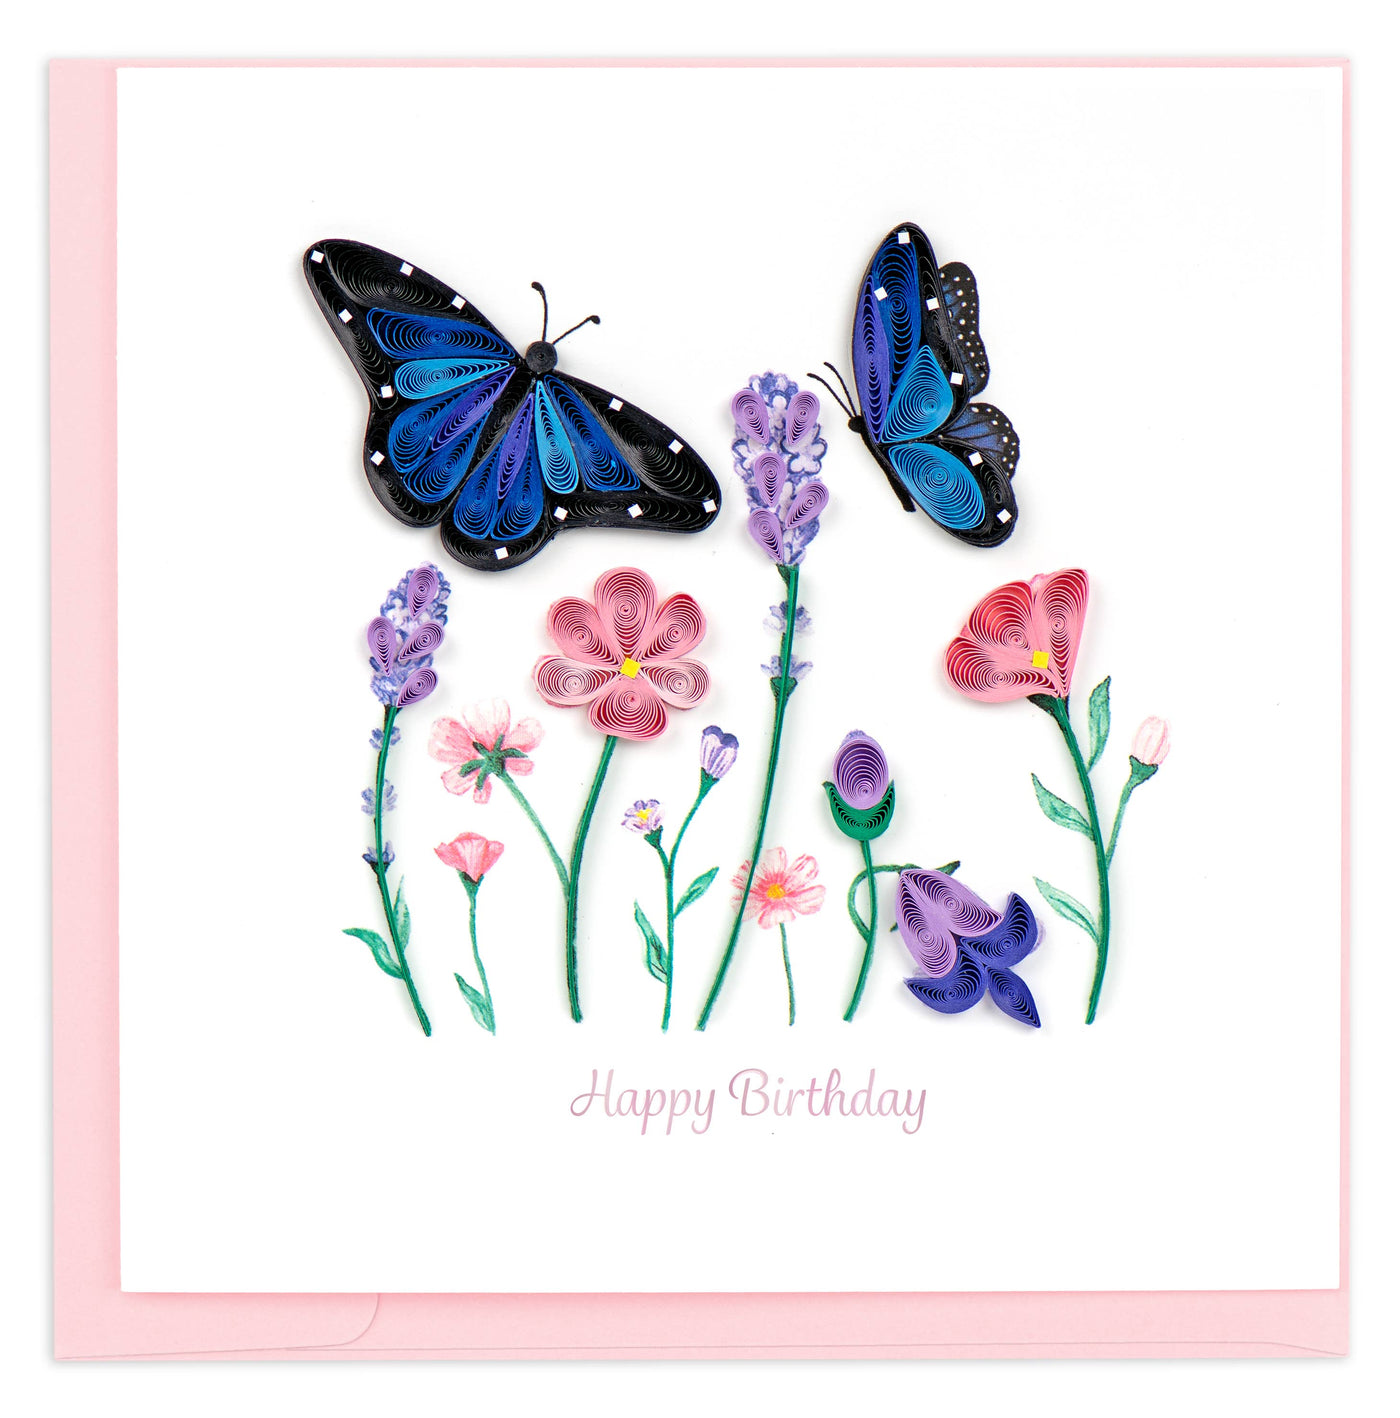 Quilled Birthday Flowers & Blue Butterflies Greeting Card